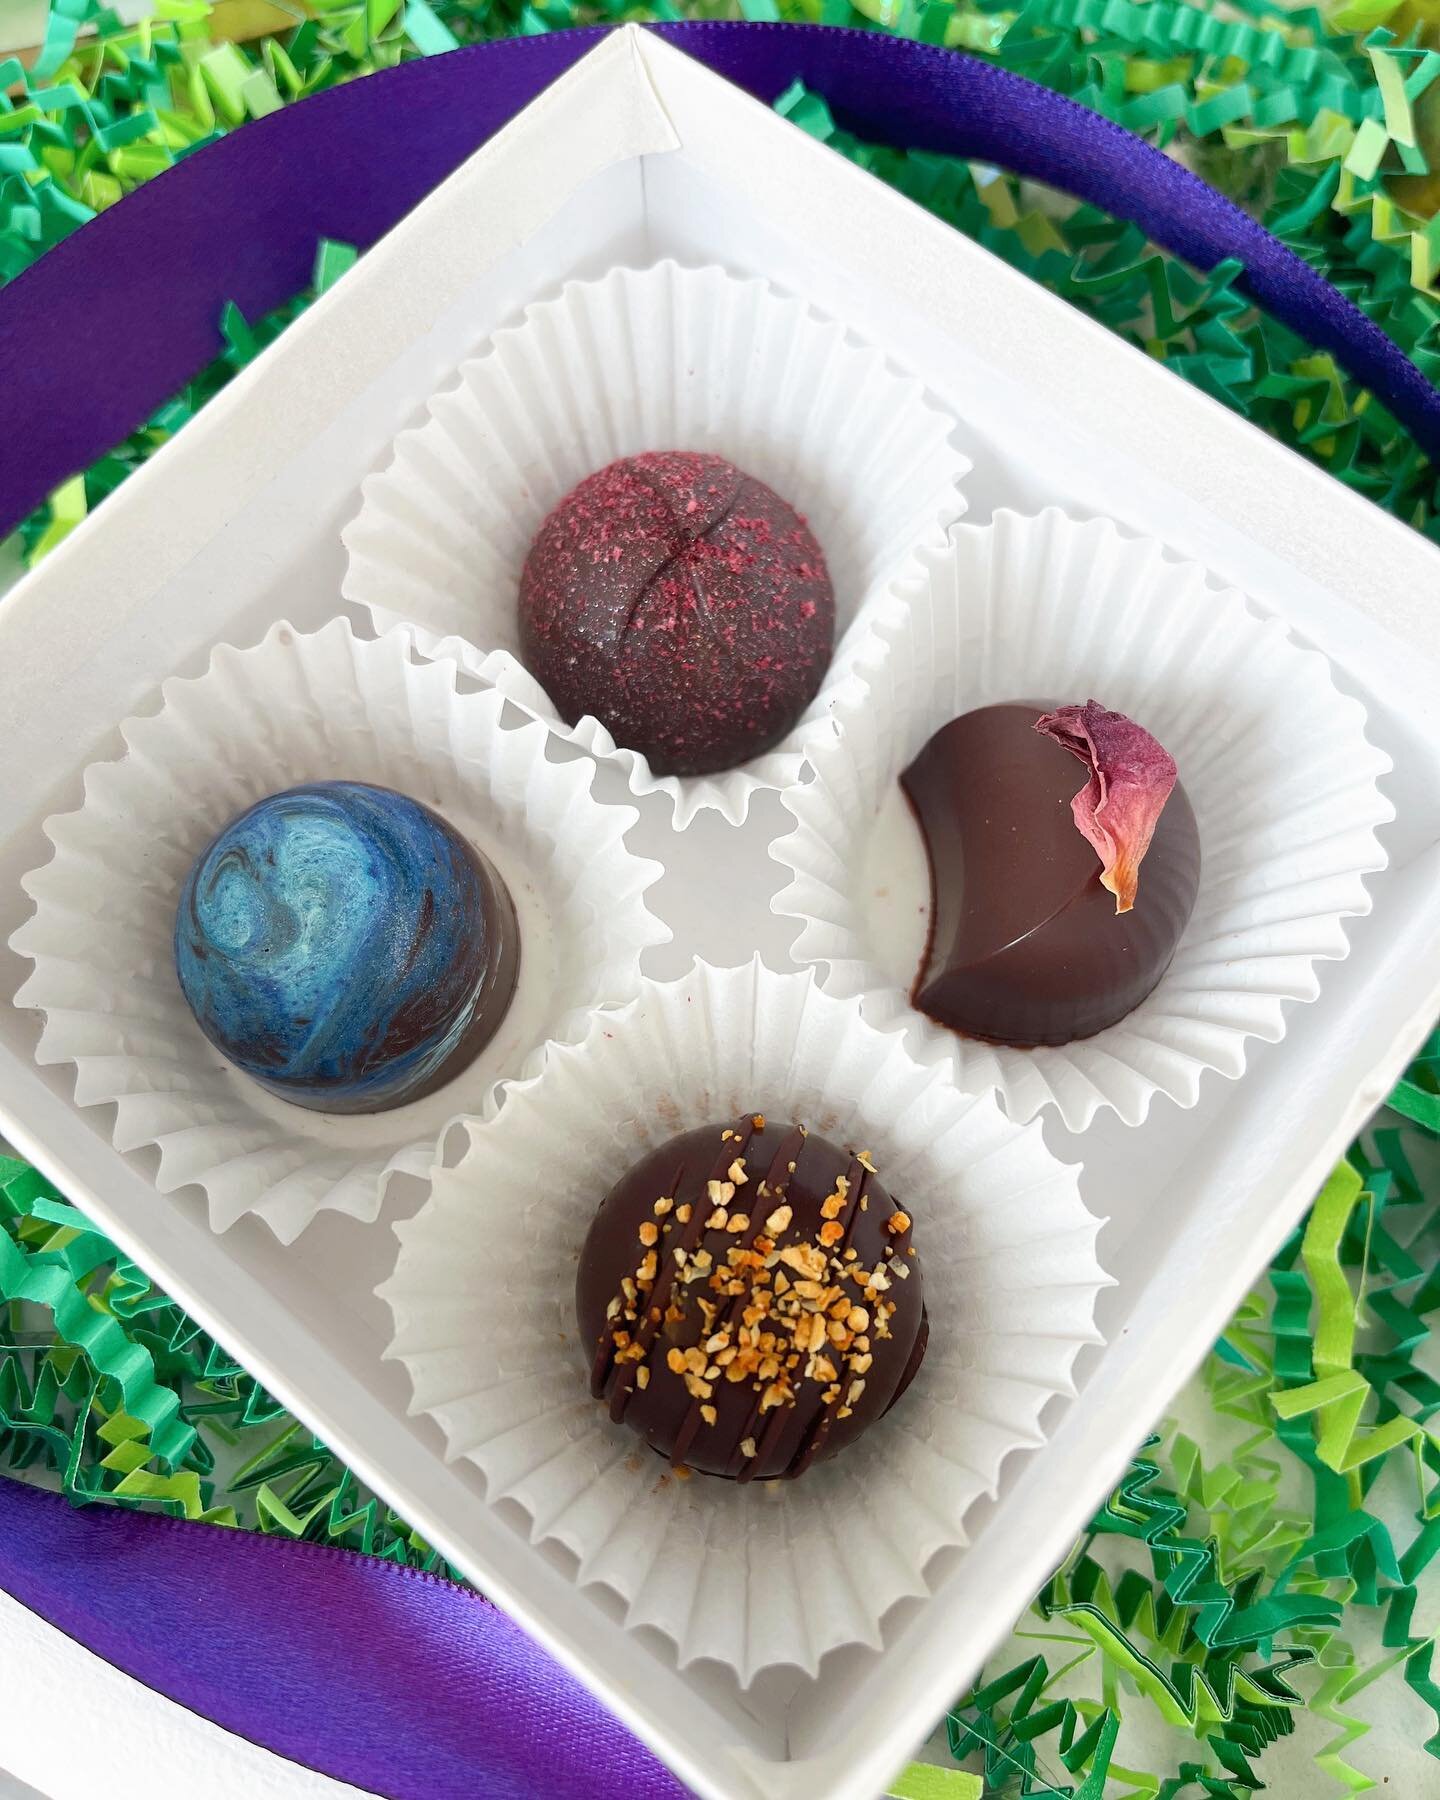 Tell Mom you love and appreciate her with truffles!
🌸Lavender
🌸Strawberry-Balsamic
🌸Rose
🌸Grand Marnier 

All hand crafted with our own bean to bar chocolate.

Available:
@eastashevillemarket  @northashevilletailgatemarket @hendersonvillefarmersm